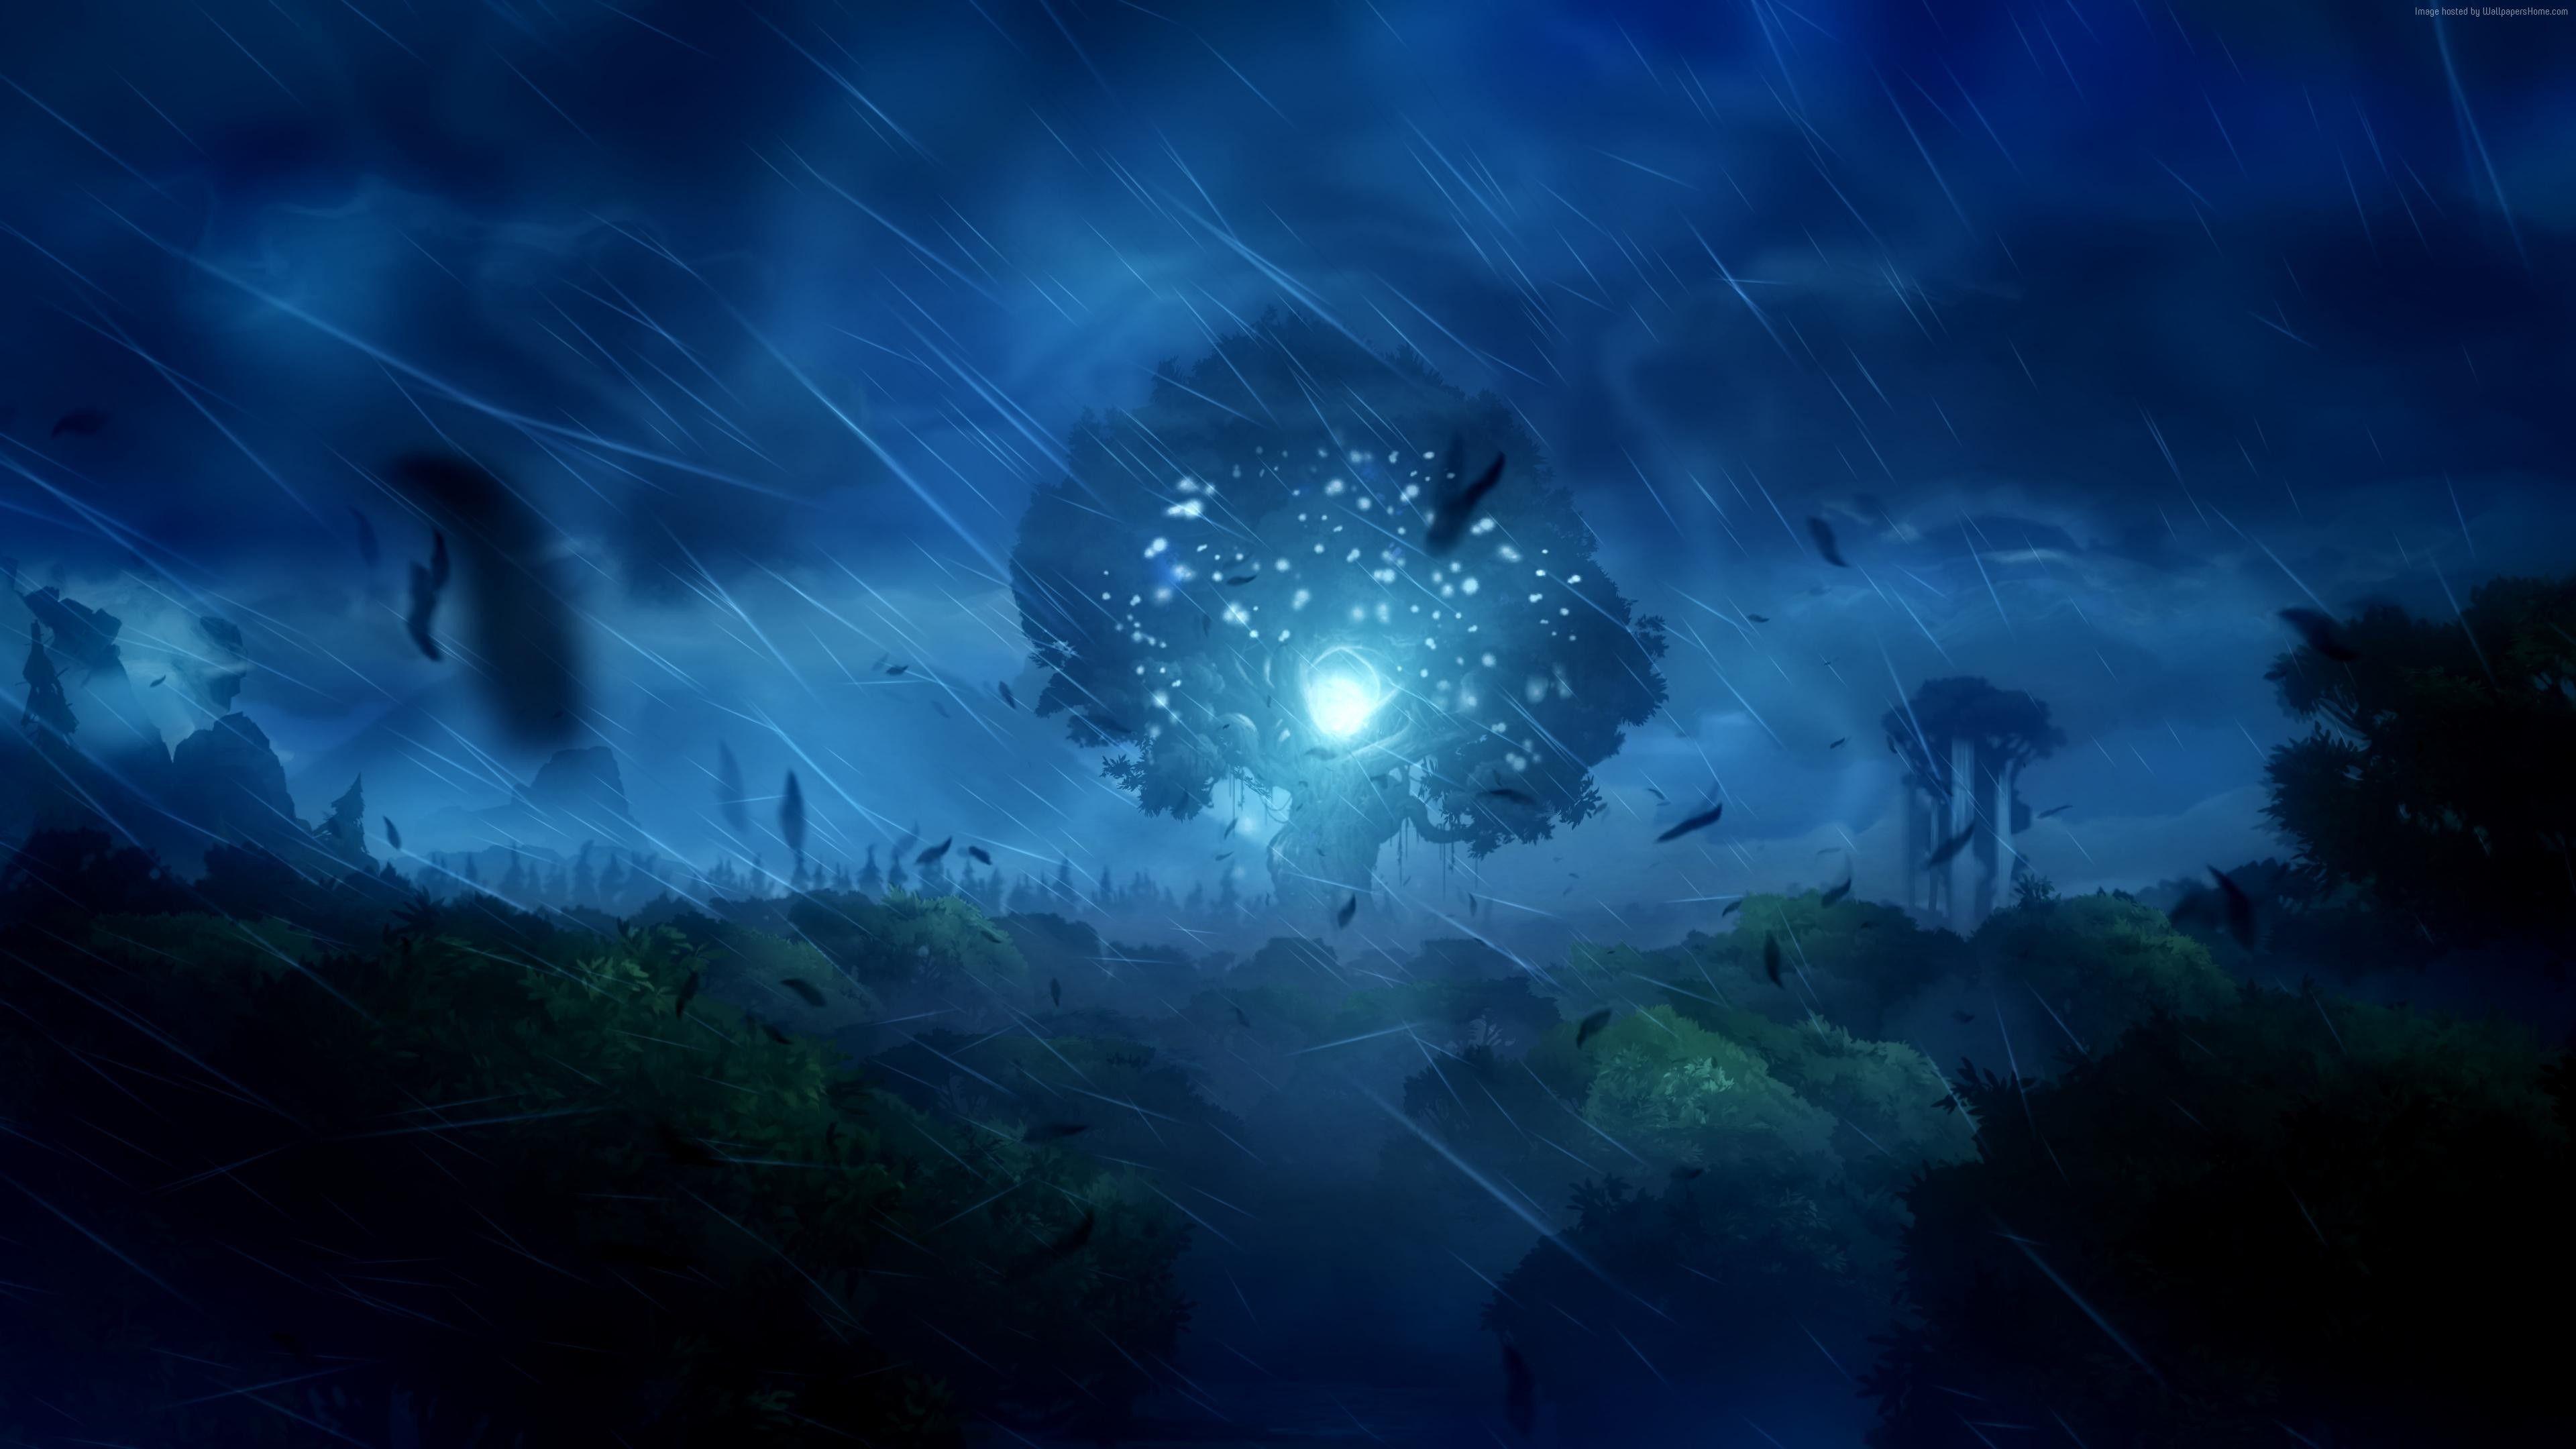 Ori and the Blind Forest Wallpaper, Games: Ori and the Blind